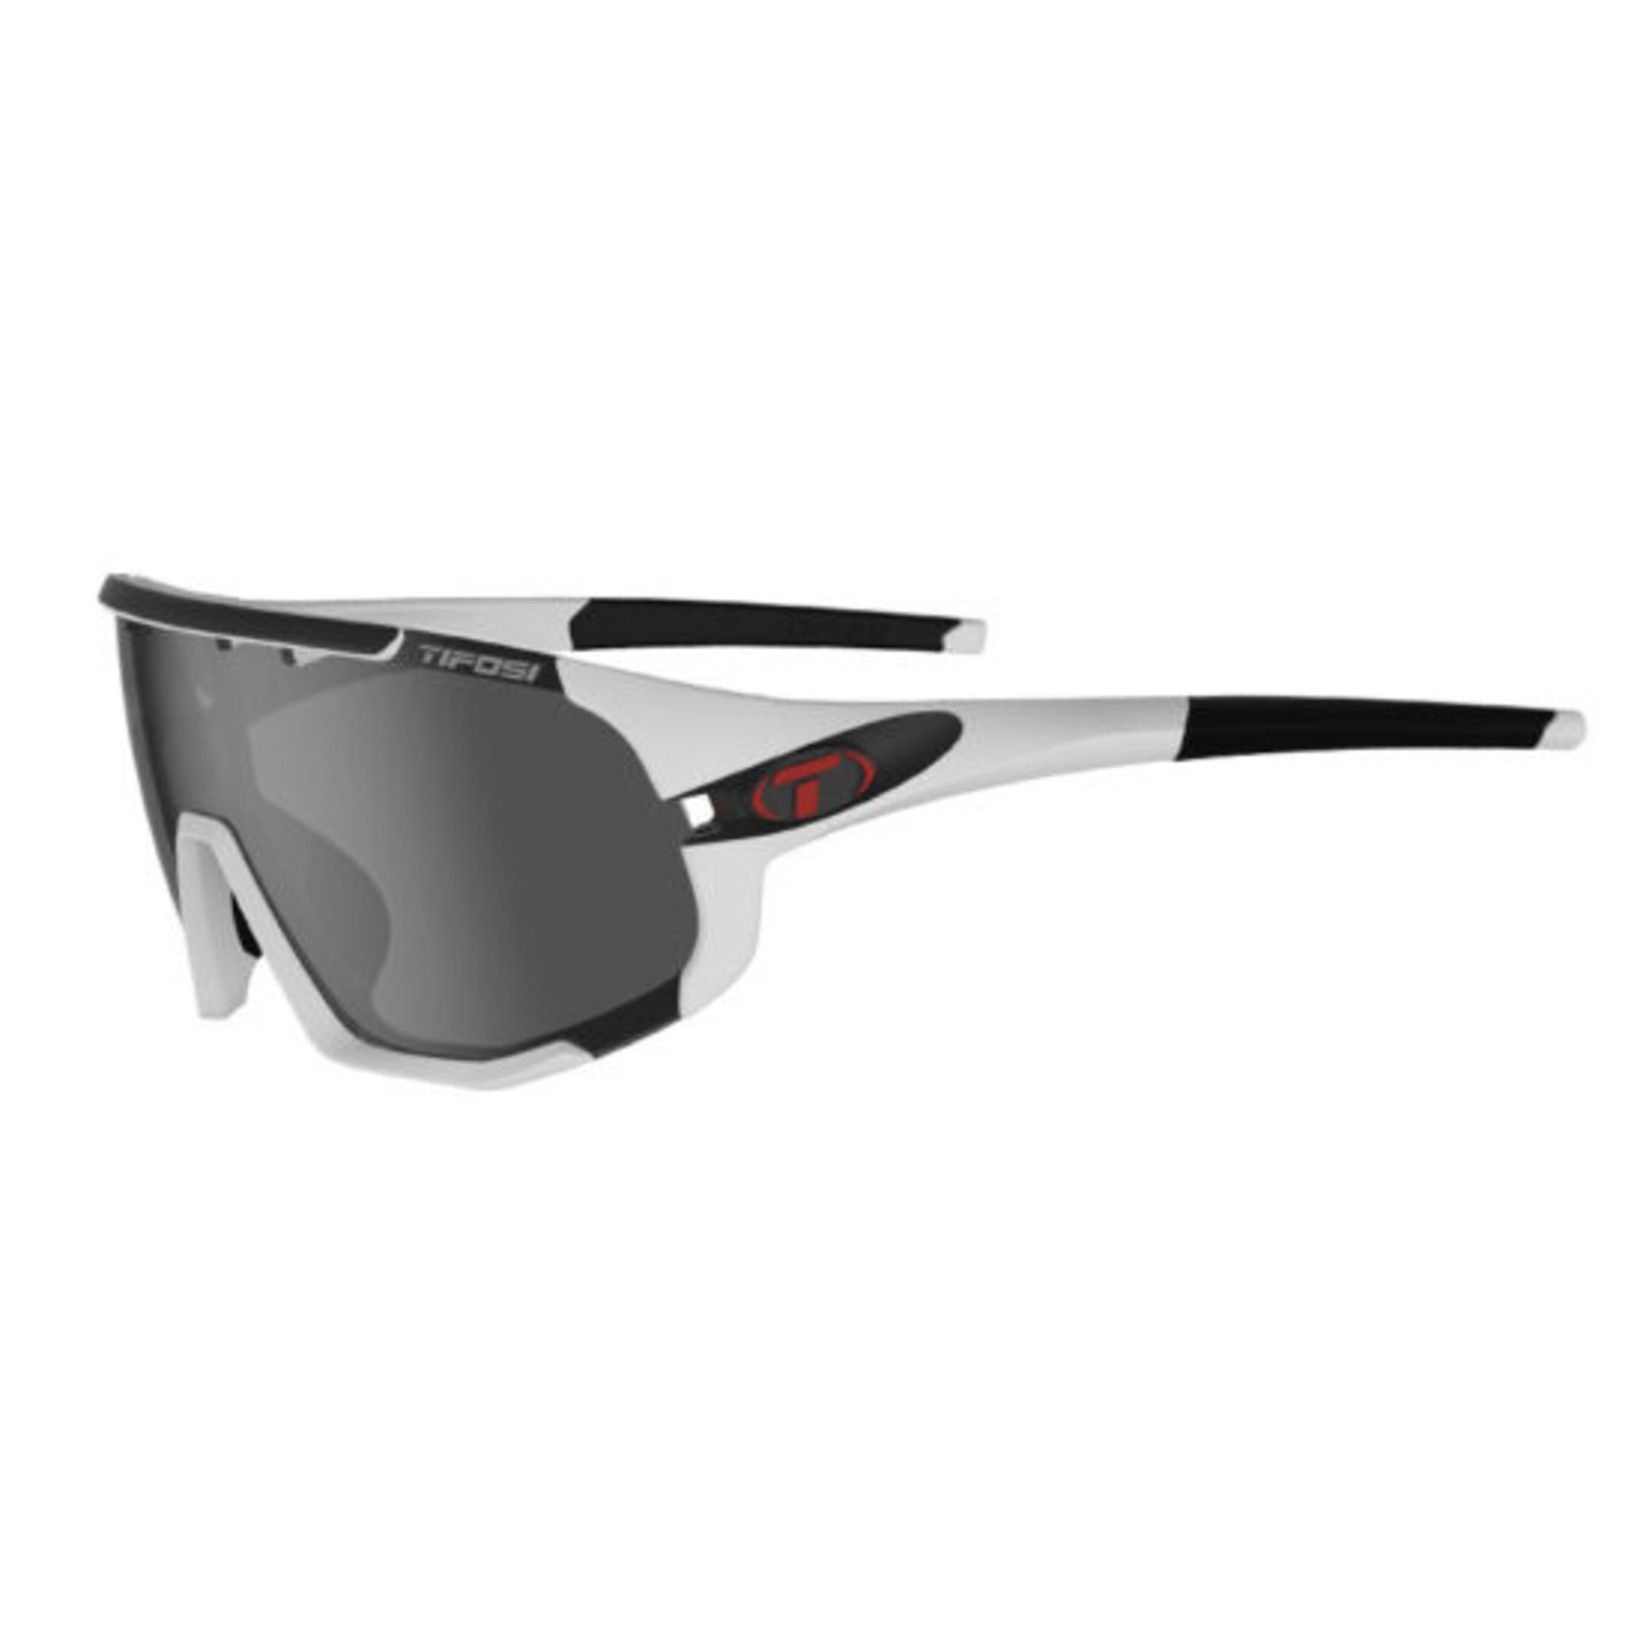 tifosi Smoke/AC Red/Clear, Sledge, Matte White Interchangeable Sunglasses. Type: Interchangeable